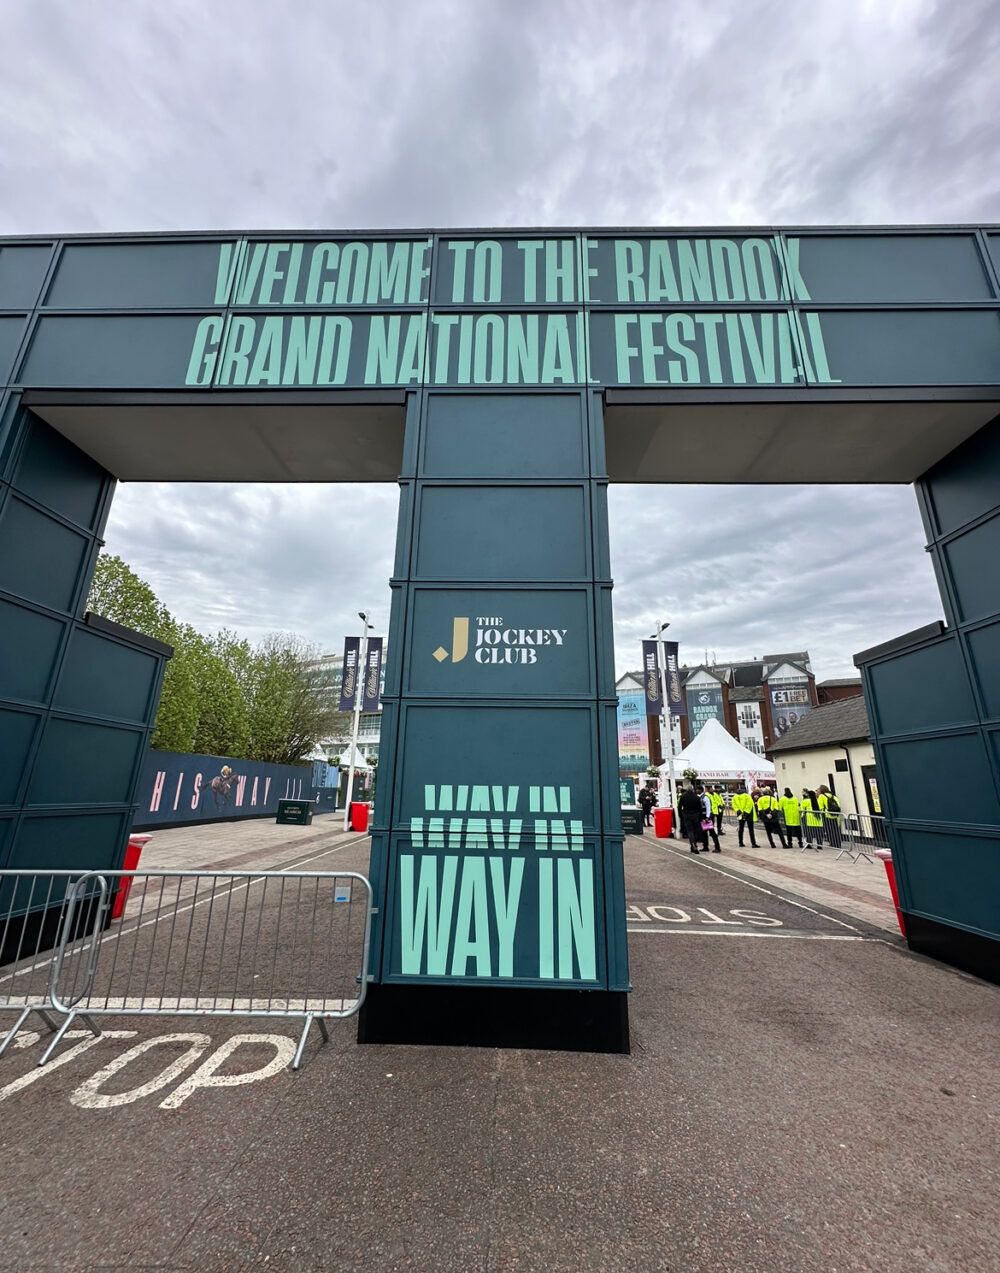 Grand NationalFestival - AintreeRacecourse - The Guide Liverpool